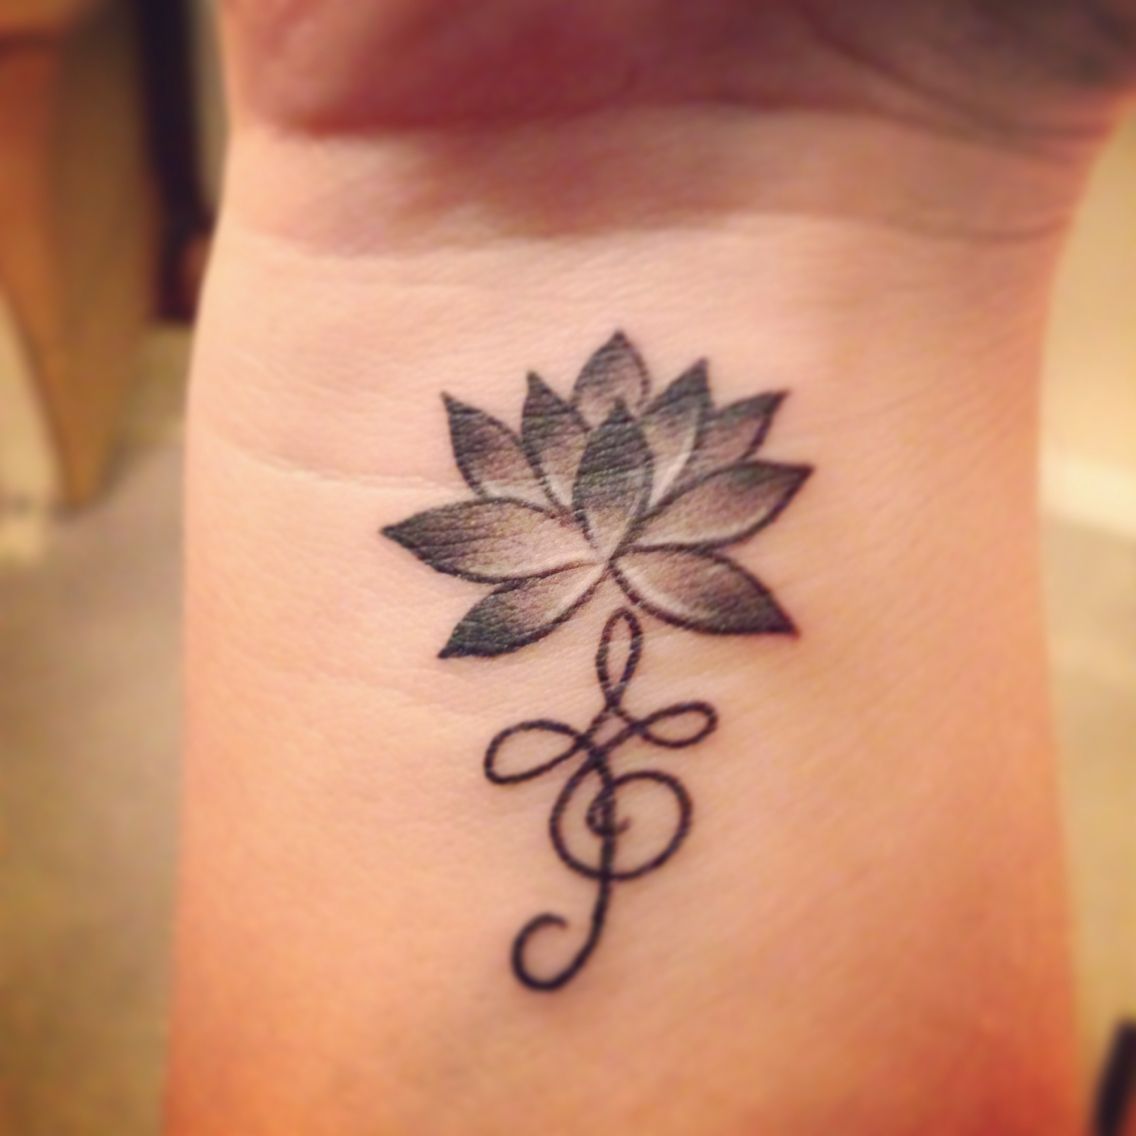 Lotus Flower For Strength And Beauty Zibu Symbol Meaning Embrace Life. Marking M... - Lotus Flower For Strength And Beauty Zibu Symbol Meaning Embrace Life. Marking My Niece’s Lily’s - #Beauty #Dr...